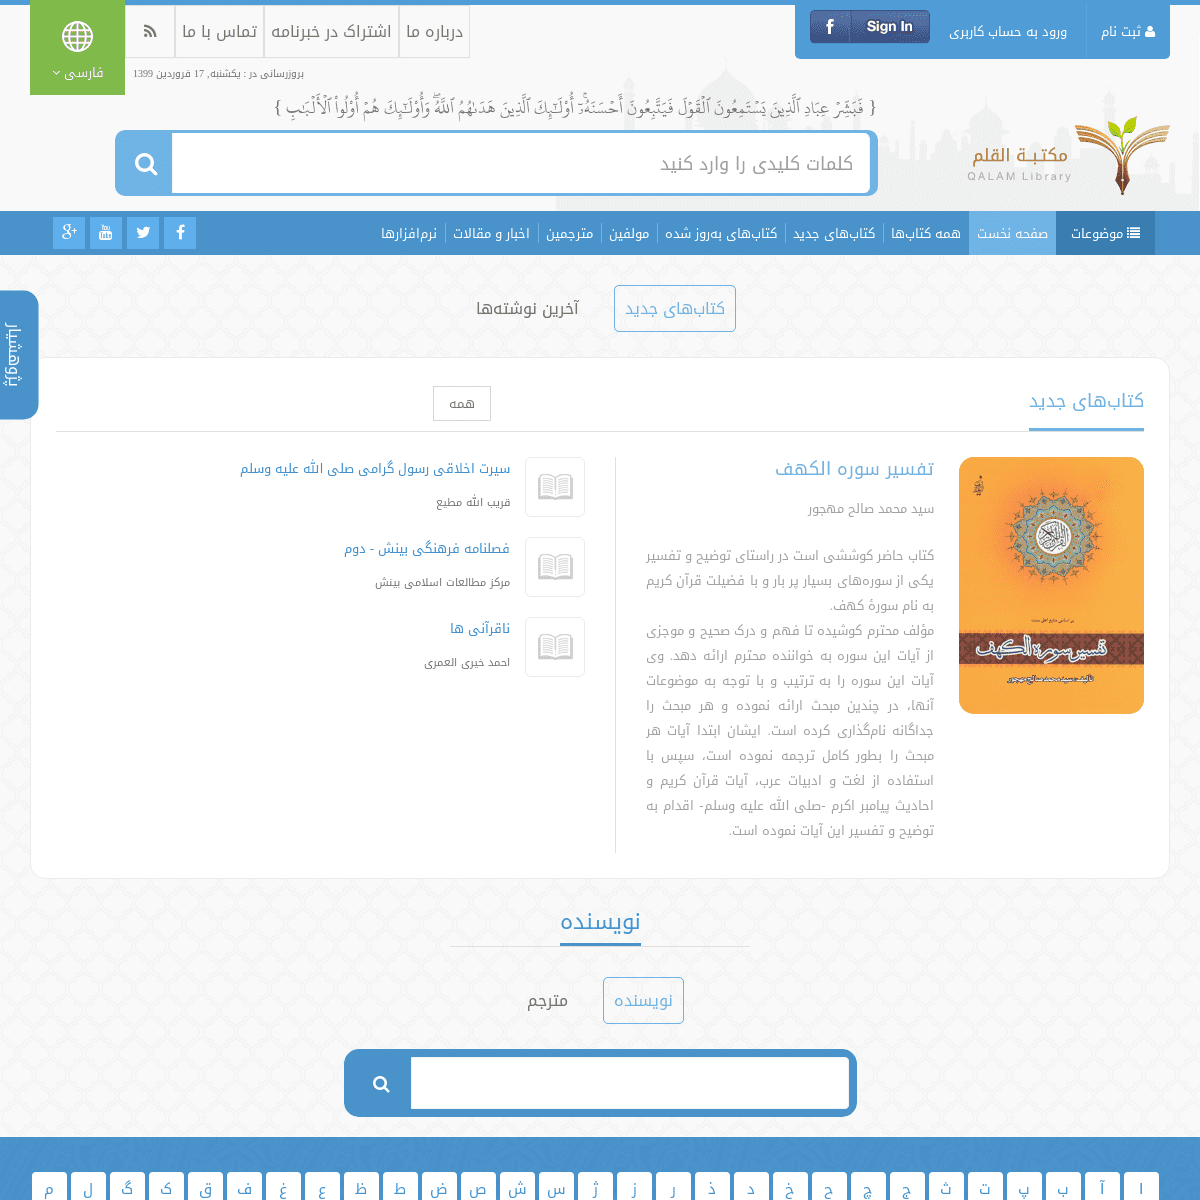 A complete backup of aqeedeh.com